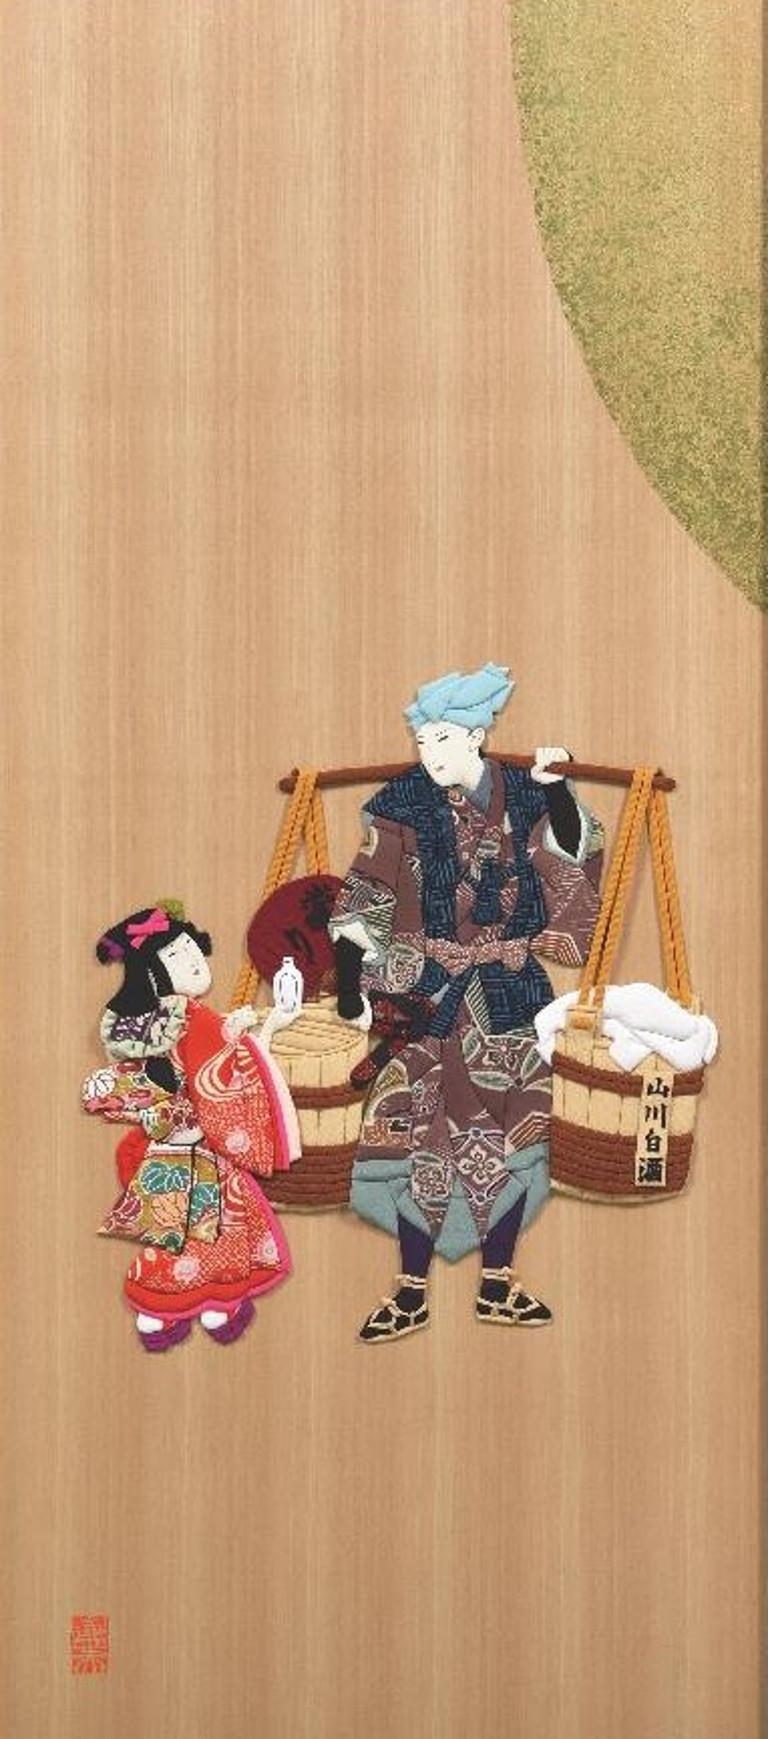 A genre Japanese painting of 18th century depicting a scene from a well-known Kabuki play entitled Sukeroku. Set on moonlit spring evening when cherry blossoms are in full bloom, the play tells the story of two brothers out to avenge the death of